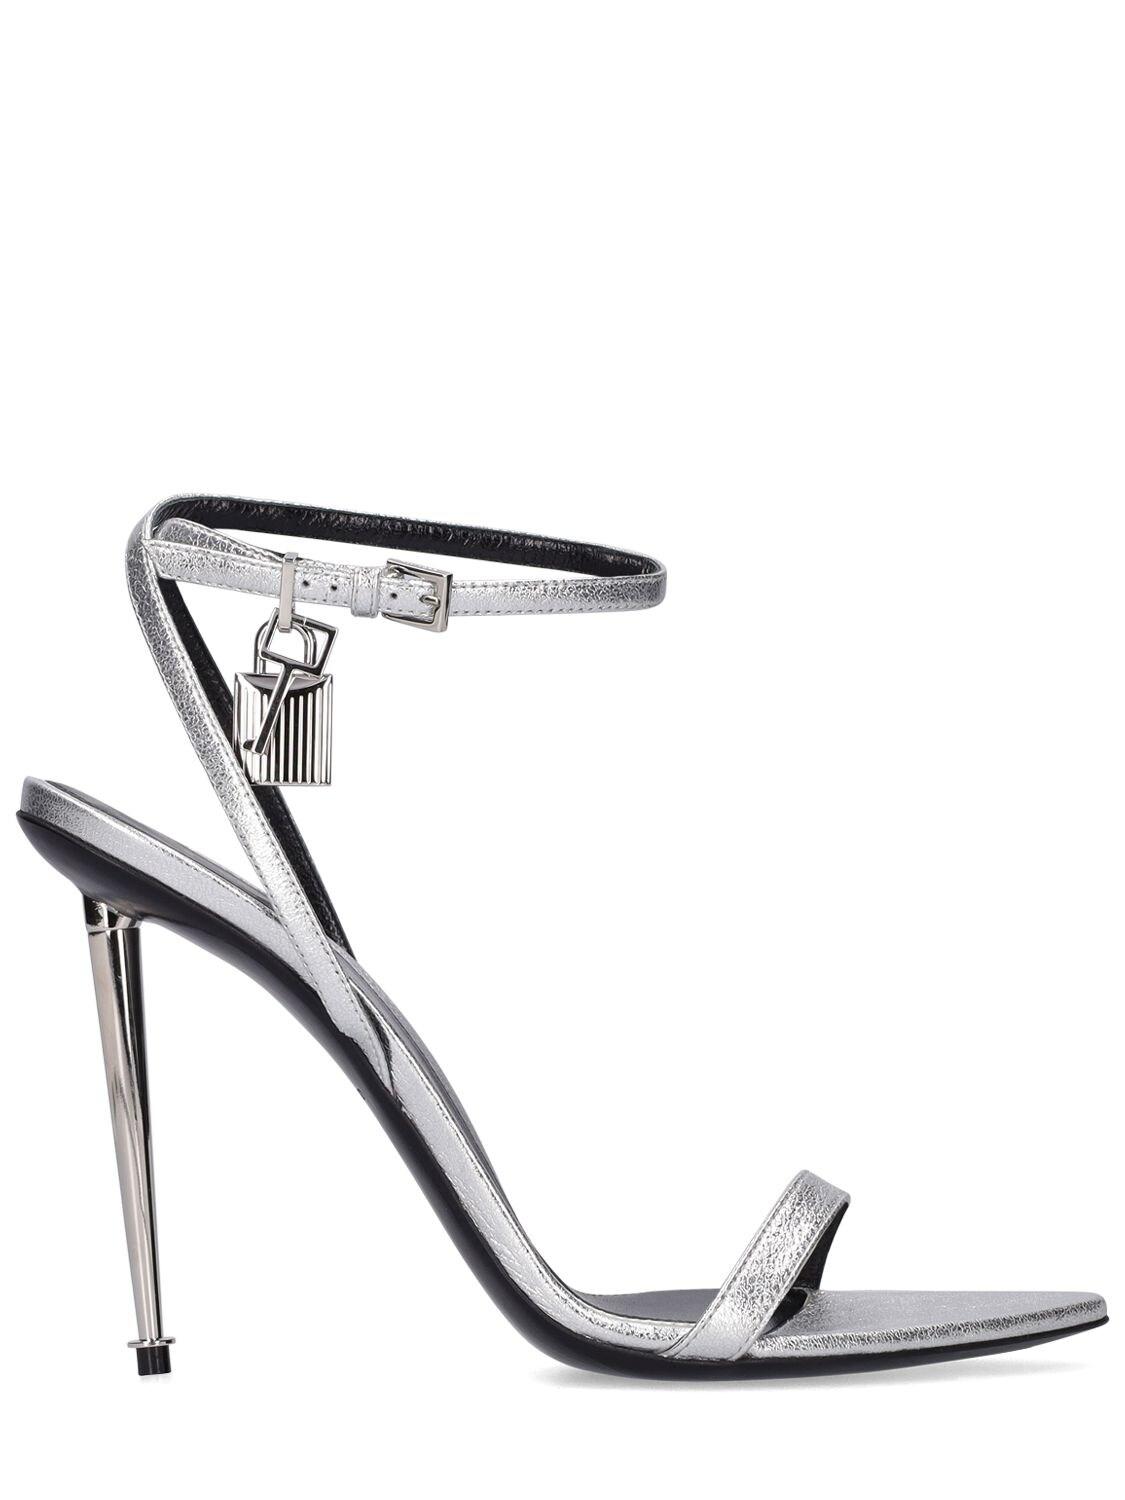 Tom Ford 105mm Padlock Laminated Leather Sandals in White | Lyst